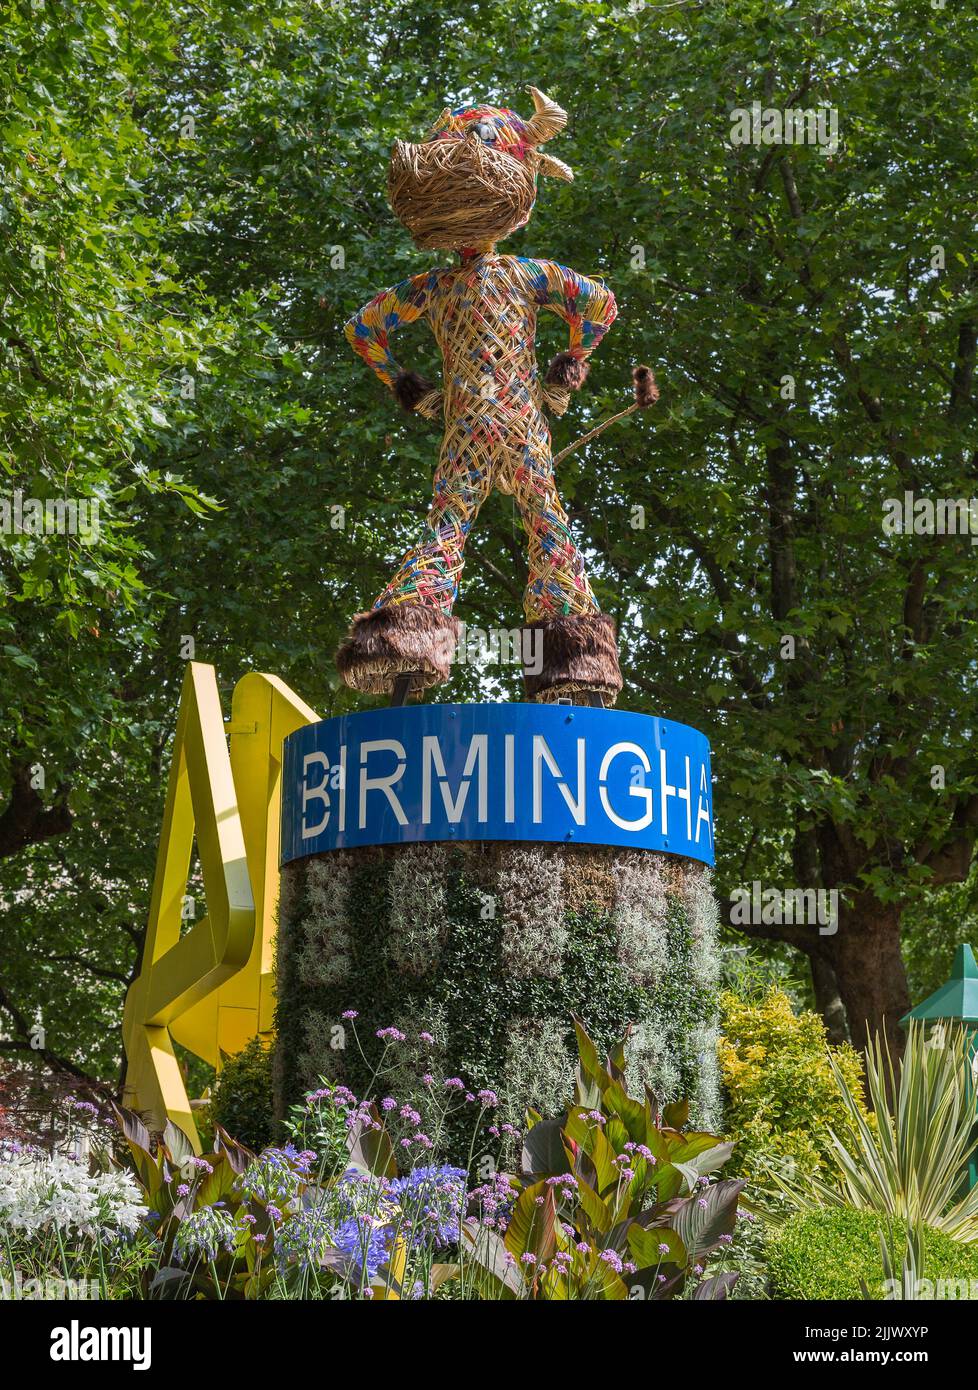 A flower display in Cathedral Square, Birmingham City Centre, featuring Perry the Bull the official mascot of the 2022 Birmingham Commonwealth Games. Stock Photo